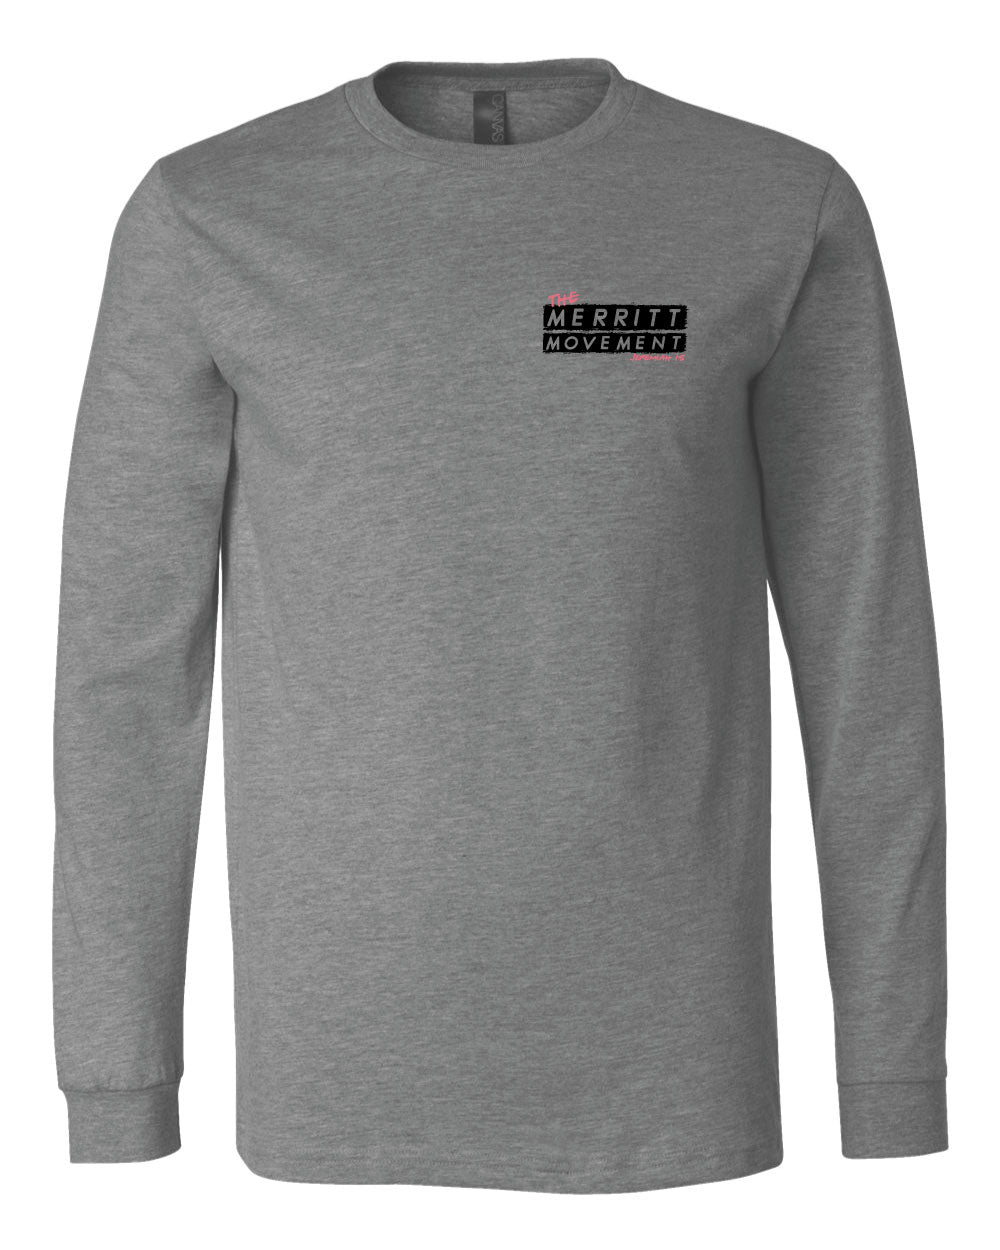 The Long Sleeved Movement Shirt - PINK